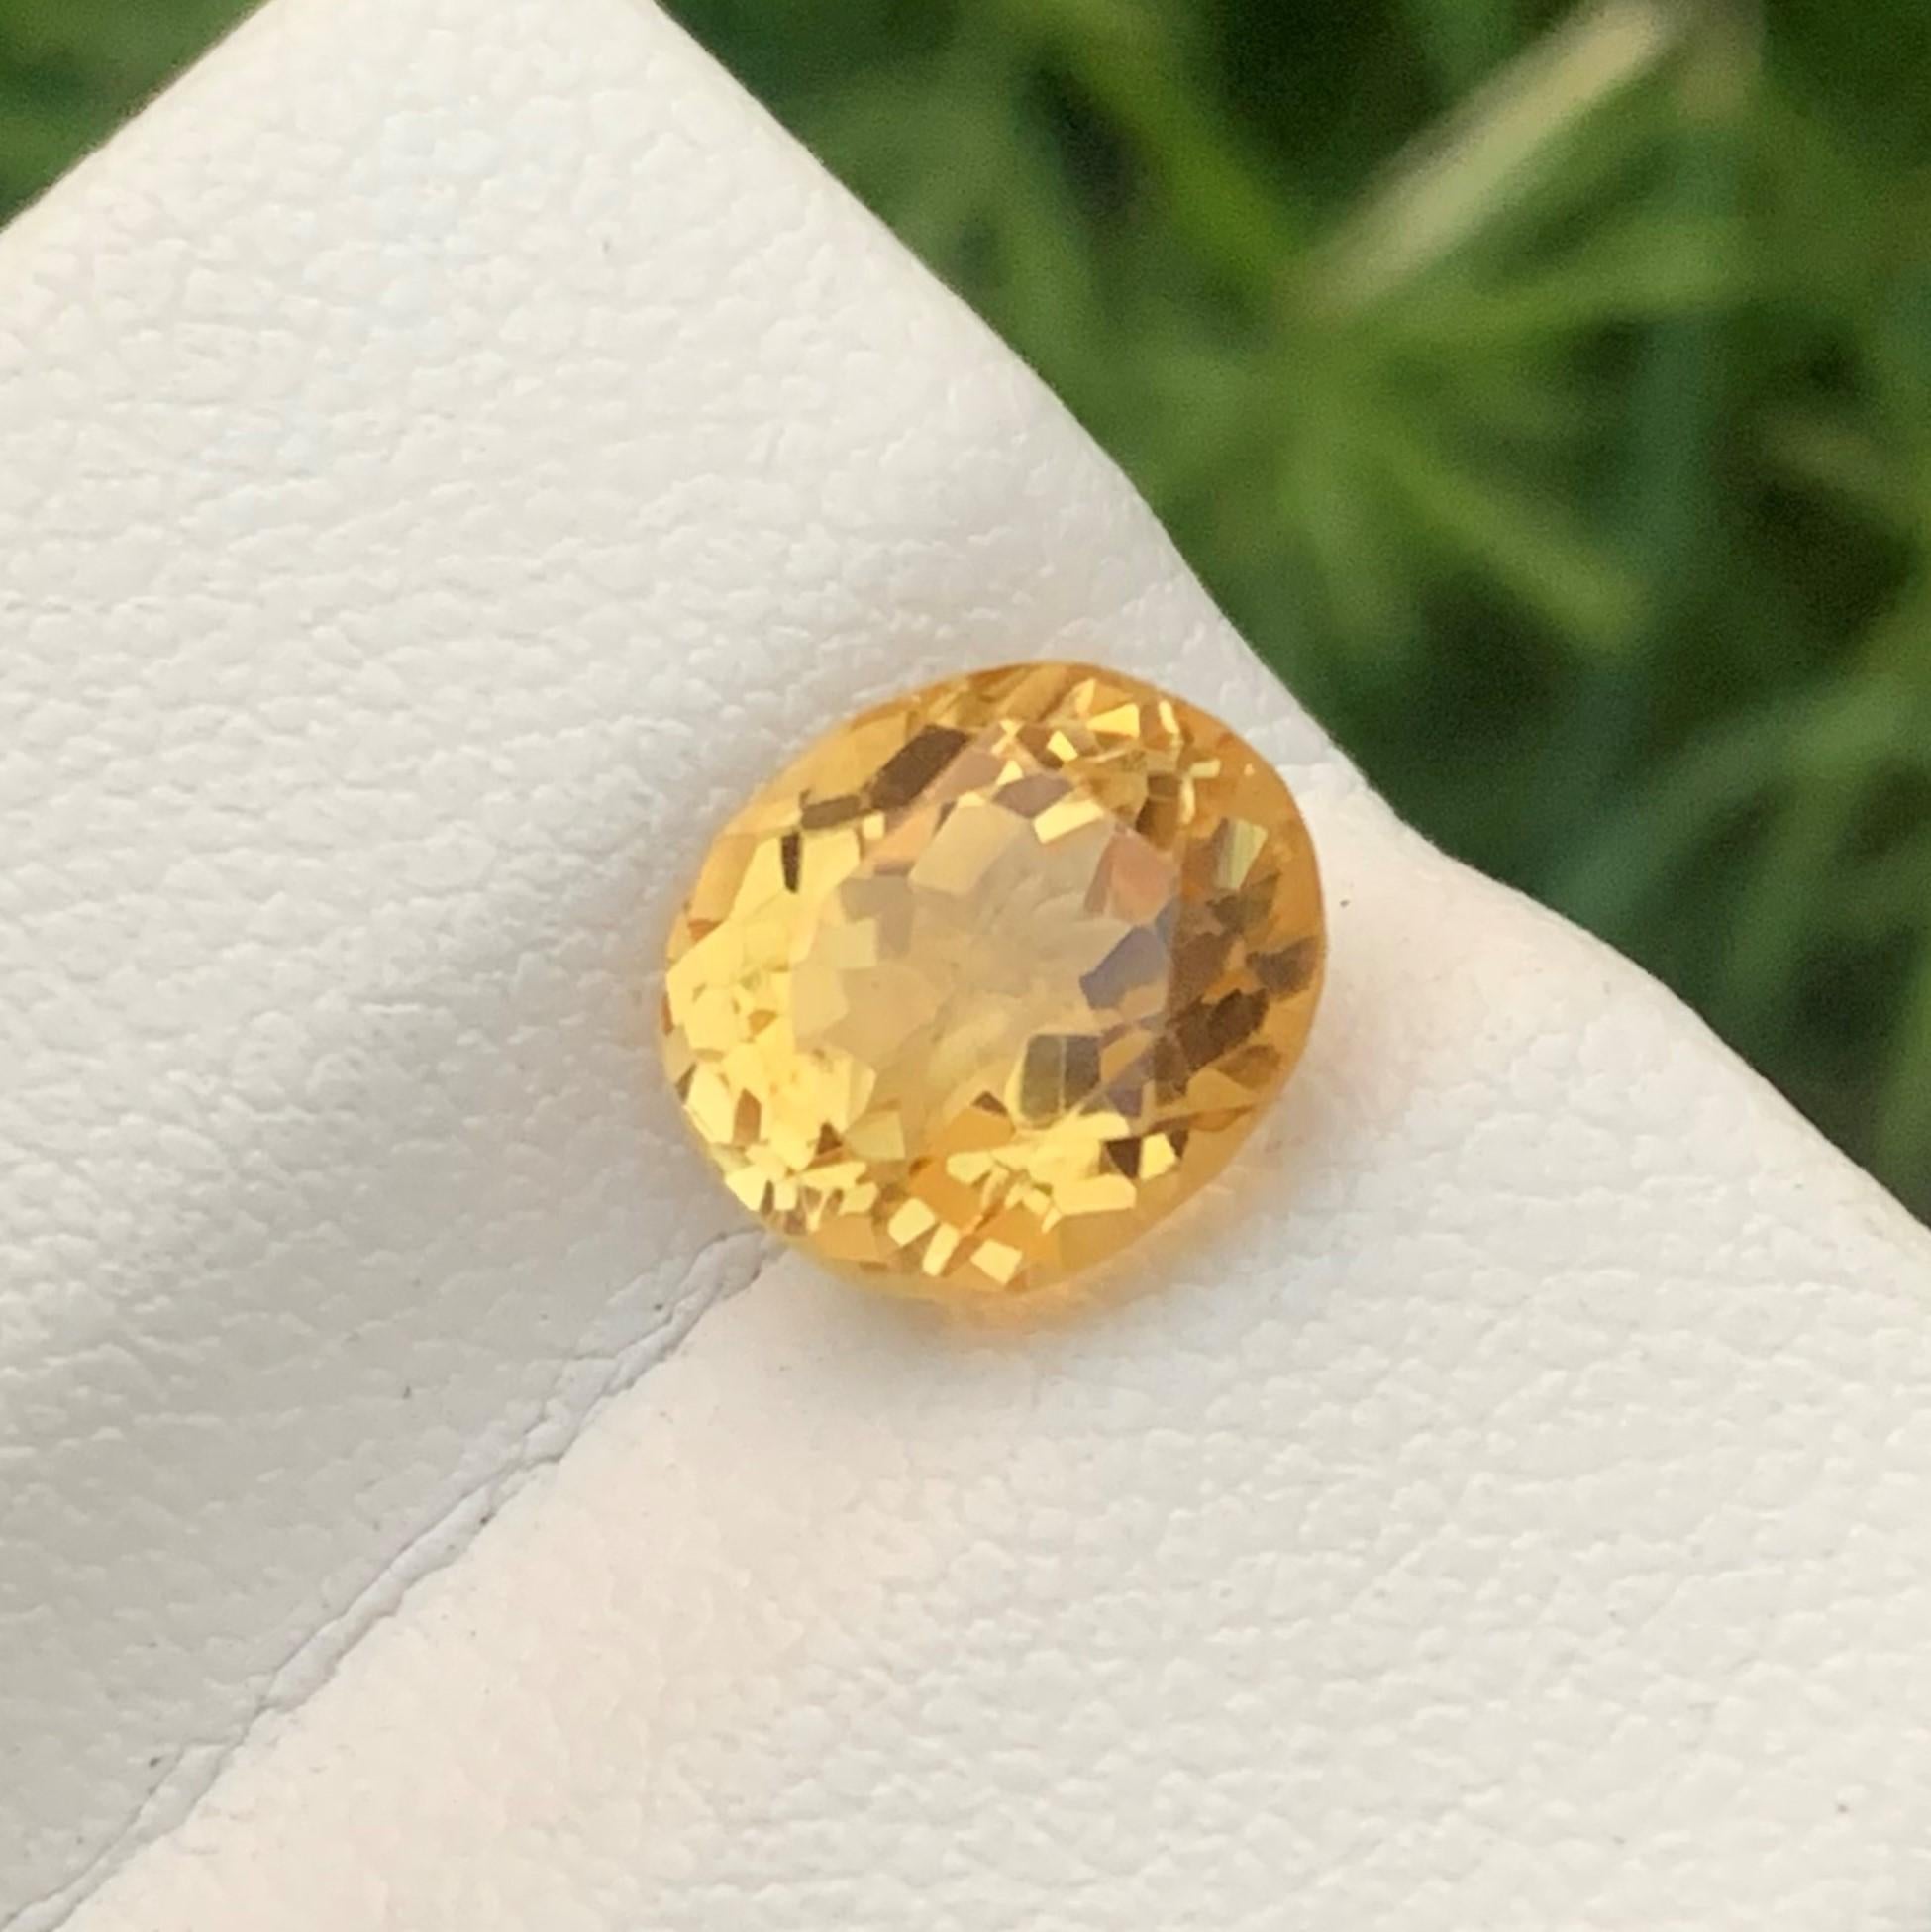 Faceted Yellow Citrine
Weight : 2.55 Carats
Dimensions : 8.6x7.5x6.5 Mm
Clarity : Eye Clean 
Origin : Brazil
Color: Yellow
Shape: Oval
Cut: Fancy
Certificate: On Demand
Month: November
.
The Many Healing Properties of Citrine
Increase Optimism, And